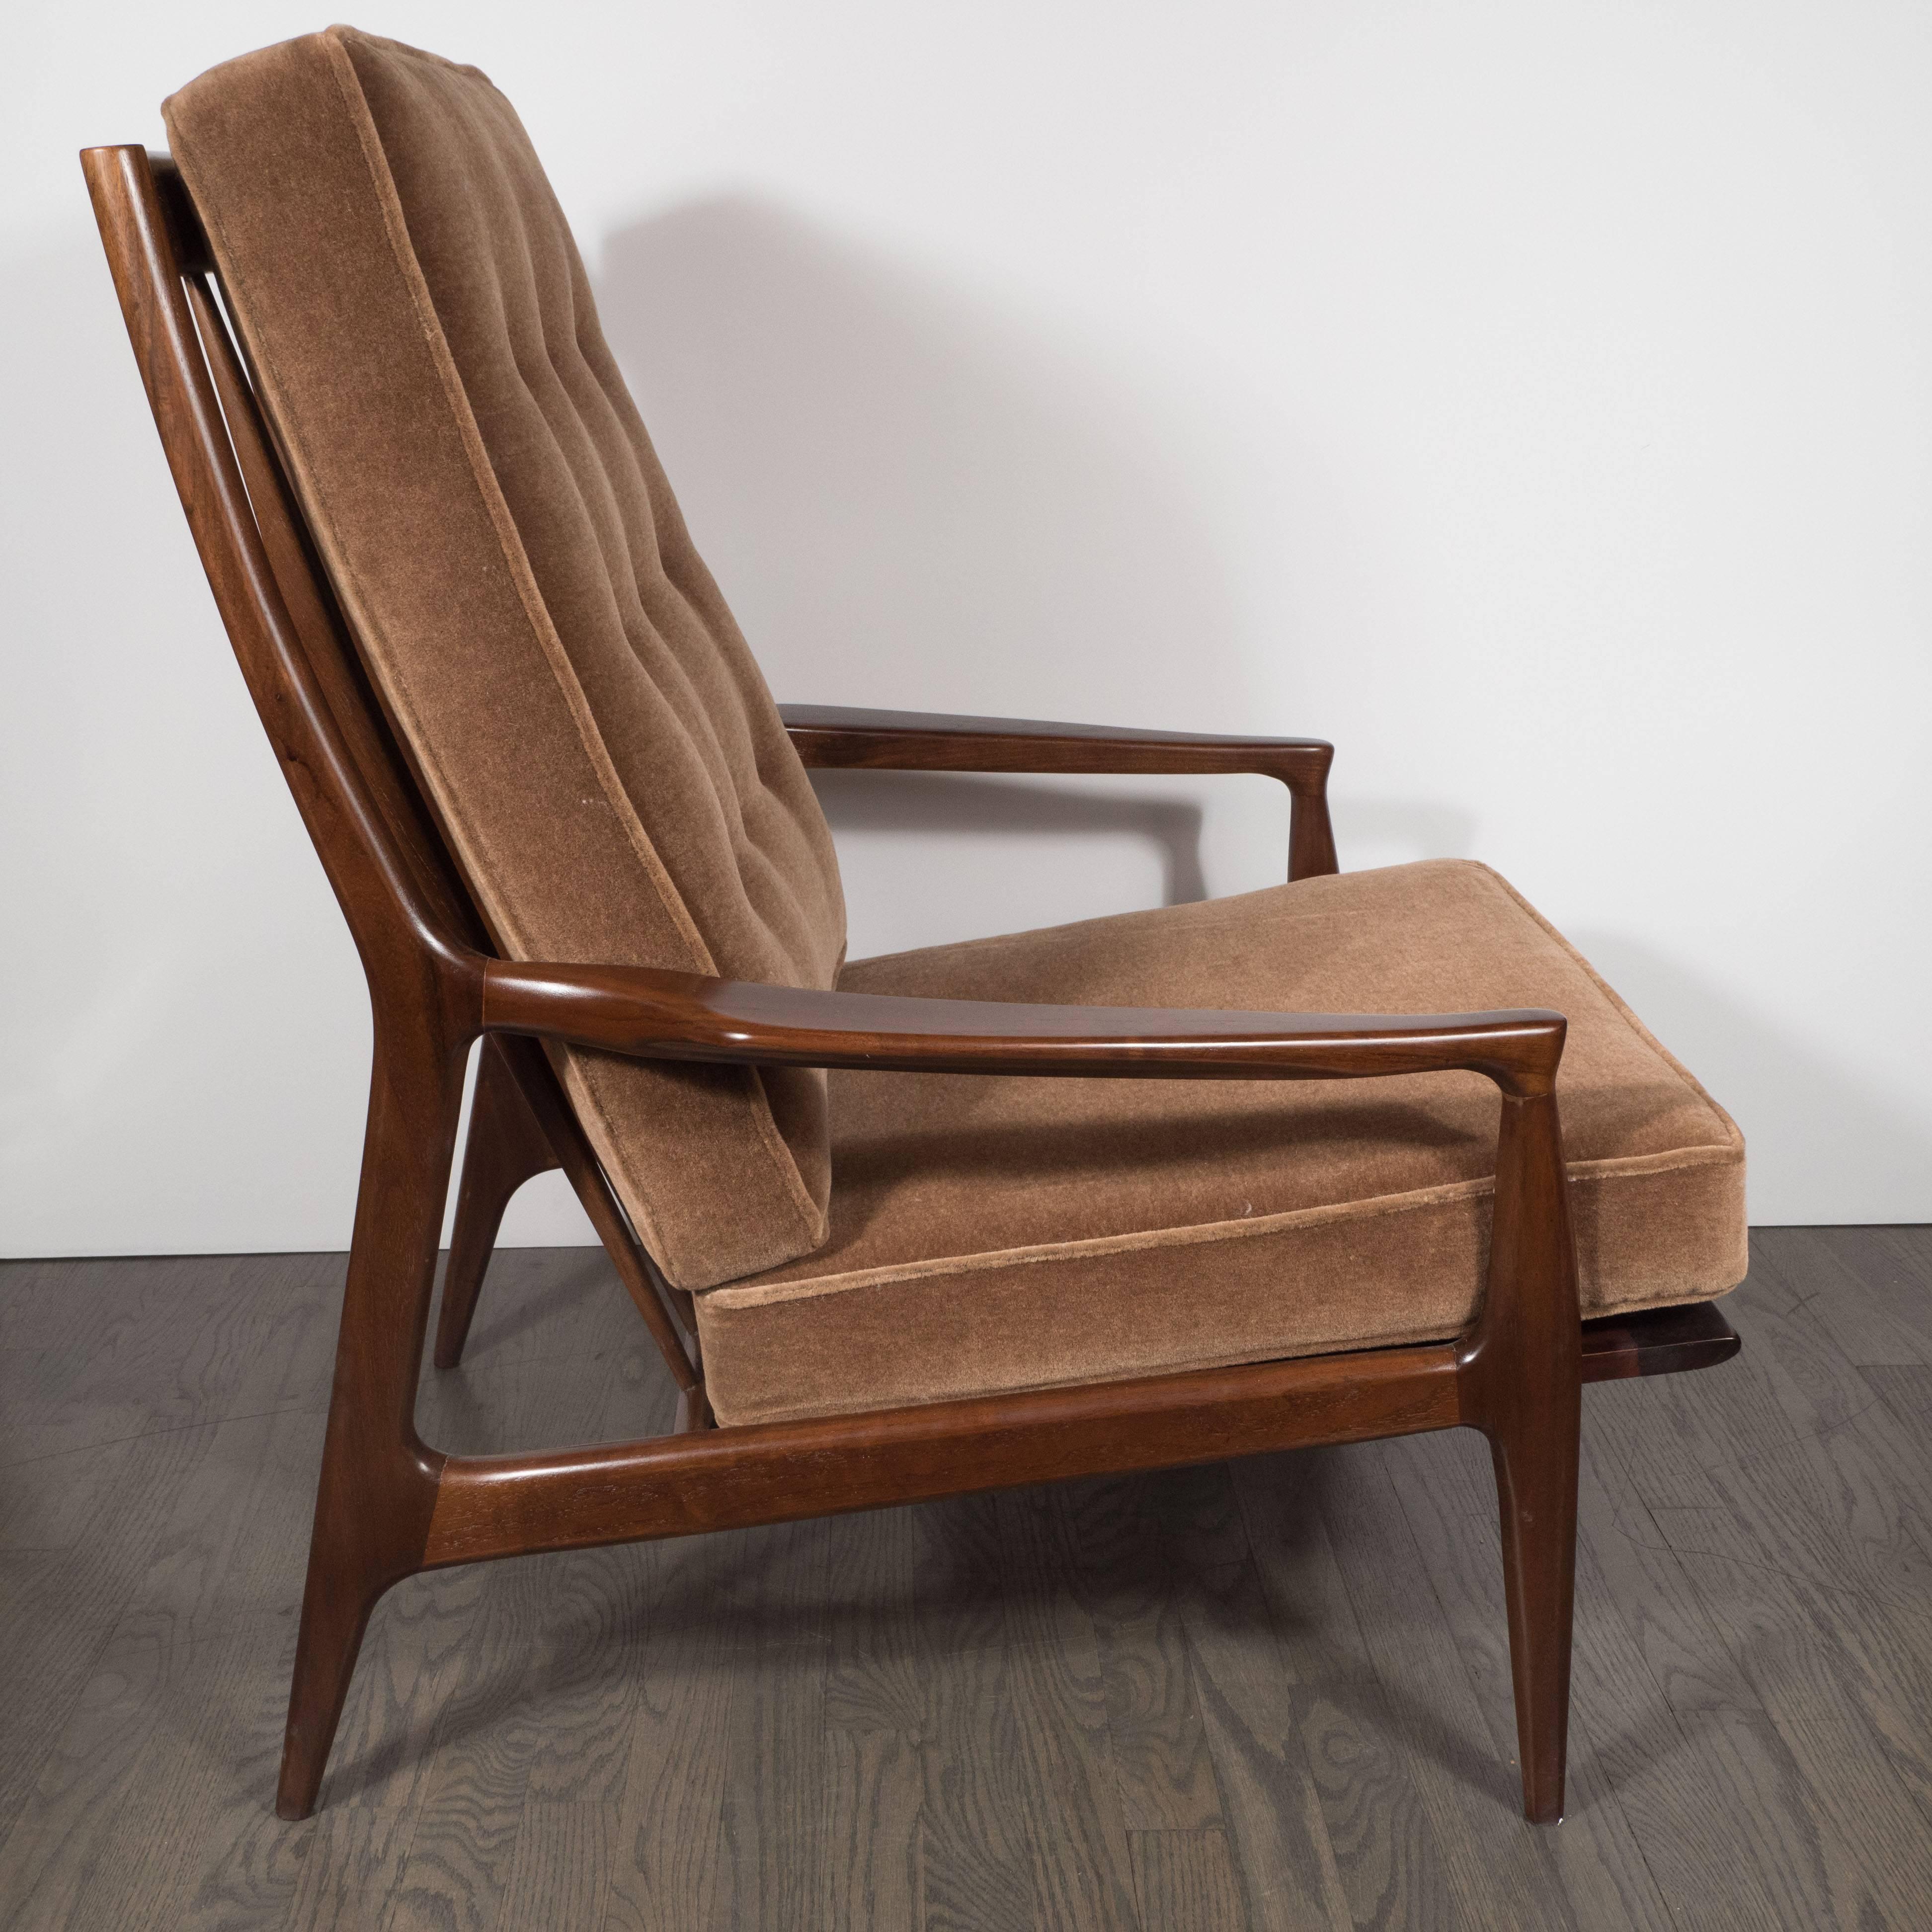 North American Mid-Century Modern Hand Rubbed Walnut Armchair in Brown Mohair by Milo Baughman